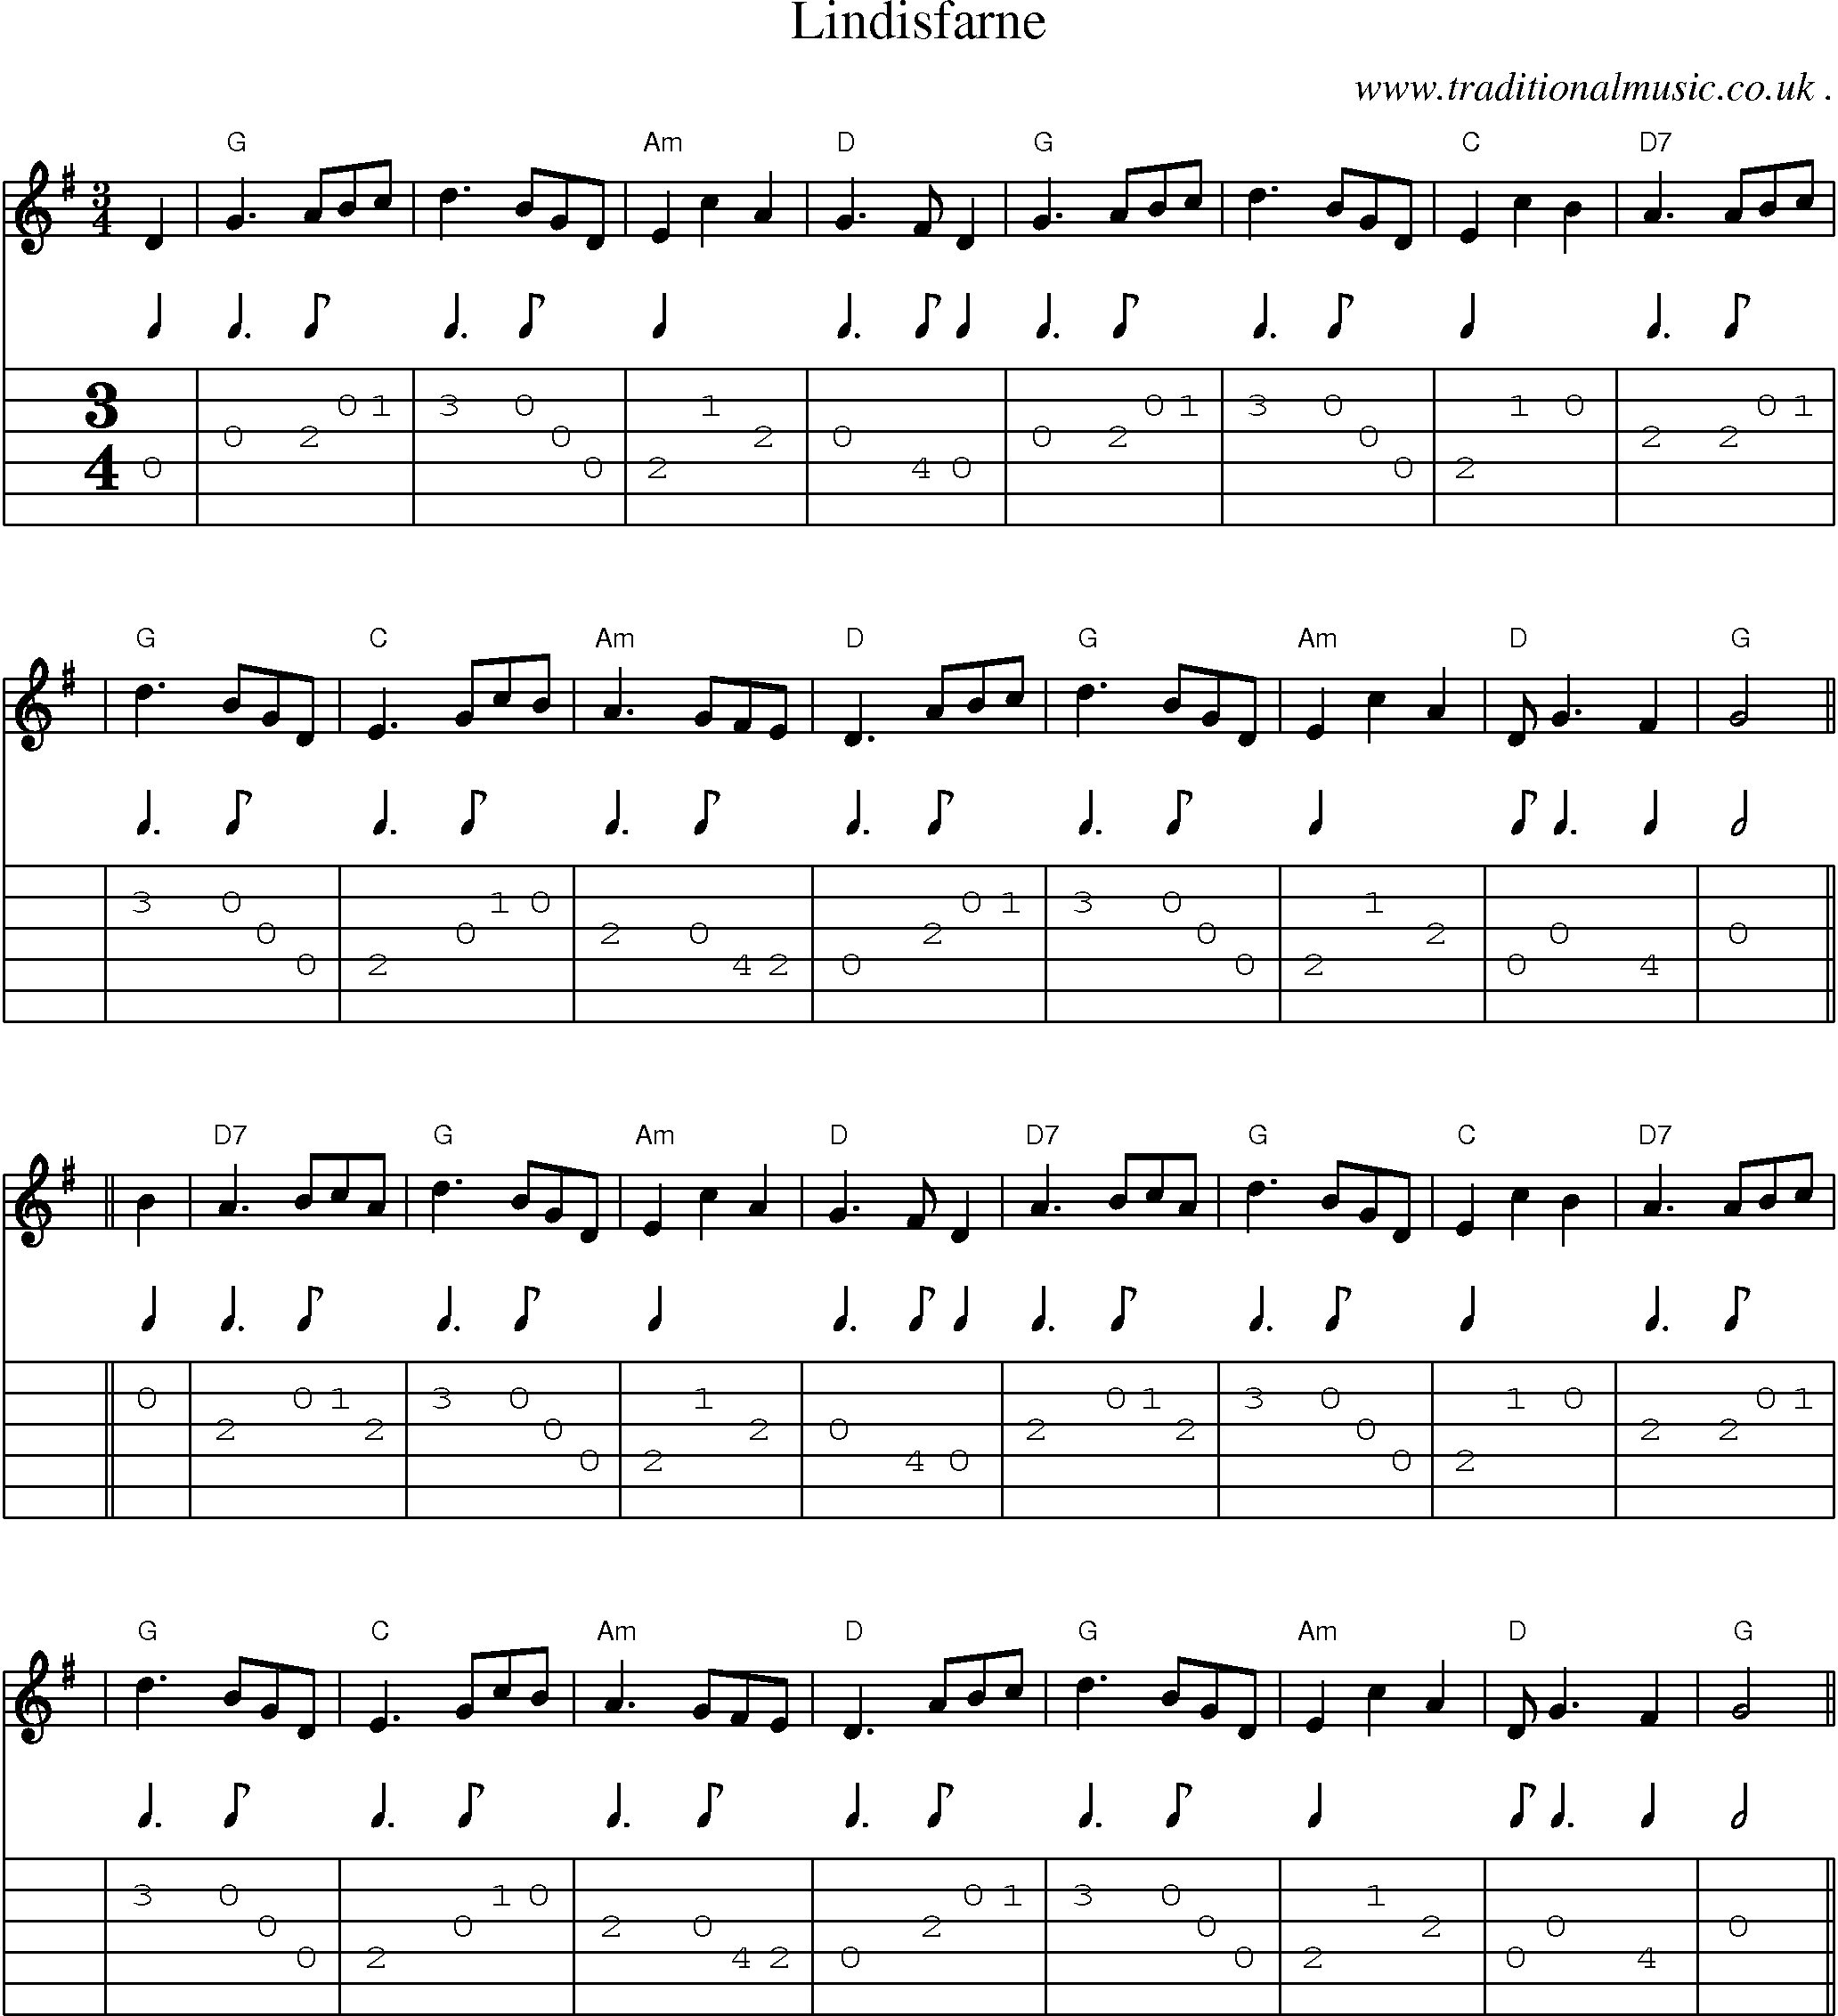 Sheet-music  score, Chords and Guitar Tabs for Lindisfarne